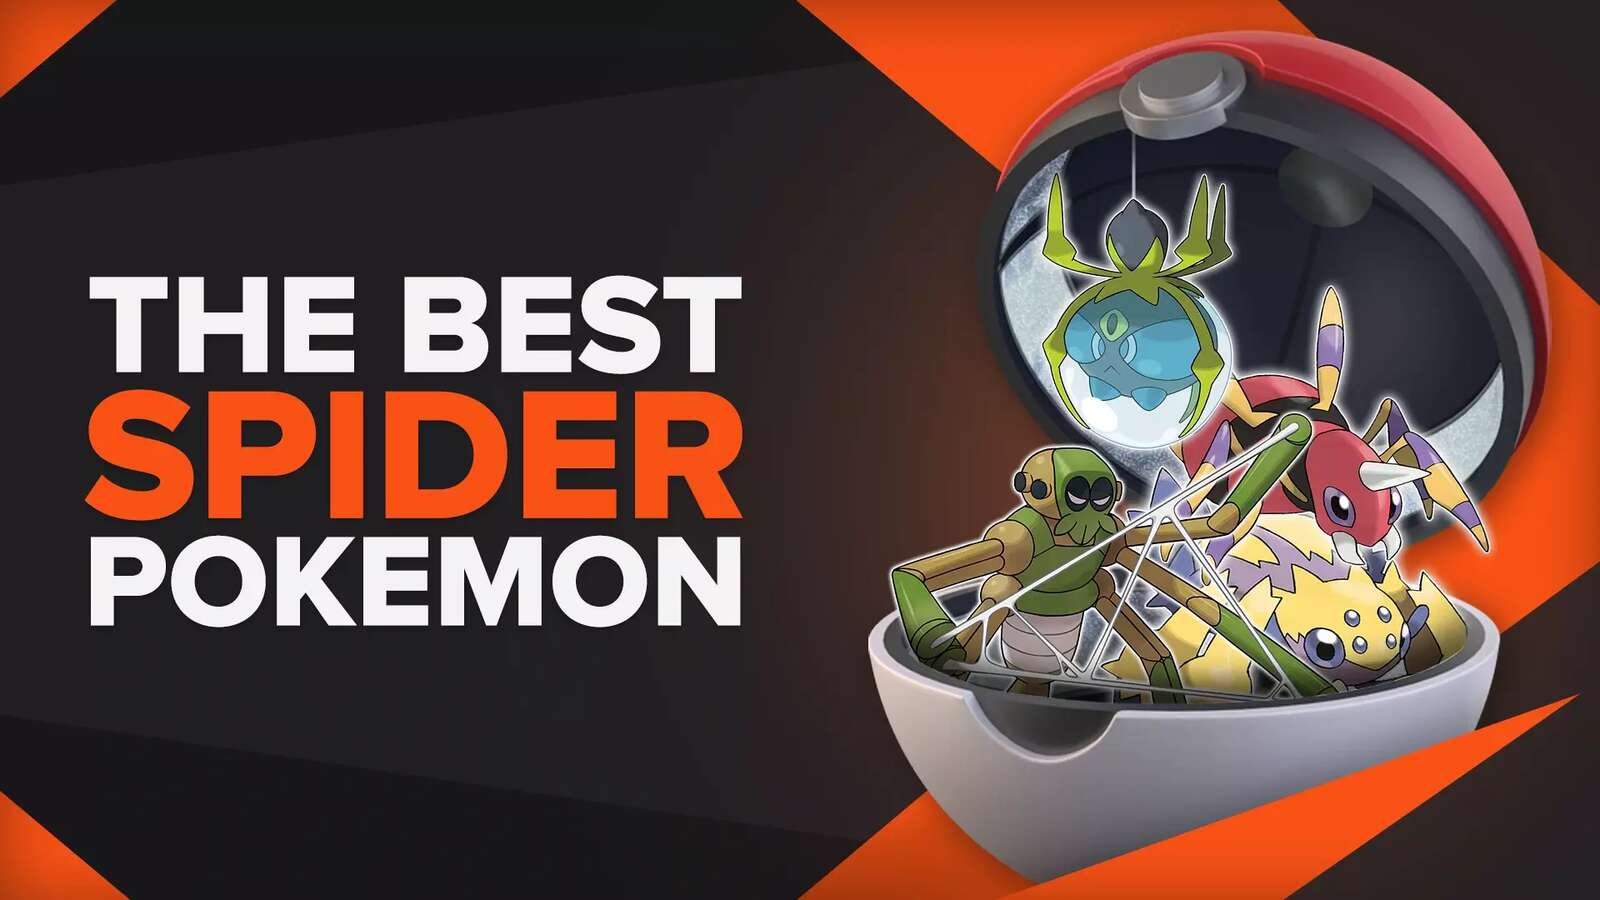 The 8 Best Spider Pokemon In The Franchise [Ranked]